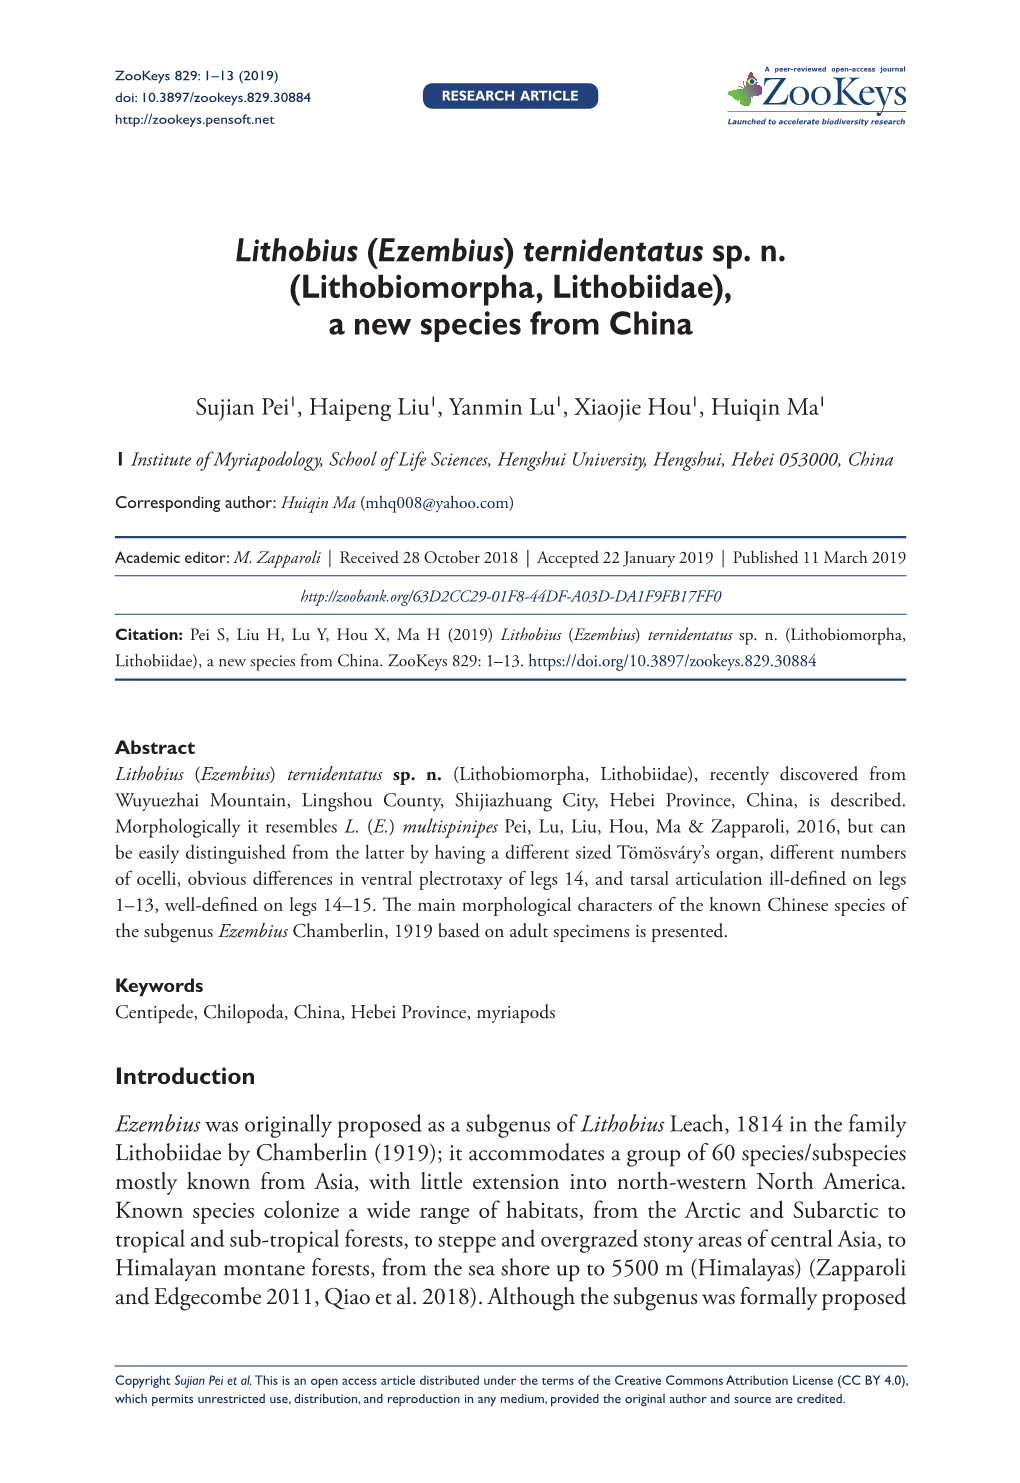 Lithobiomorpha, Lithobiidae), a New Species from China